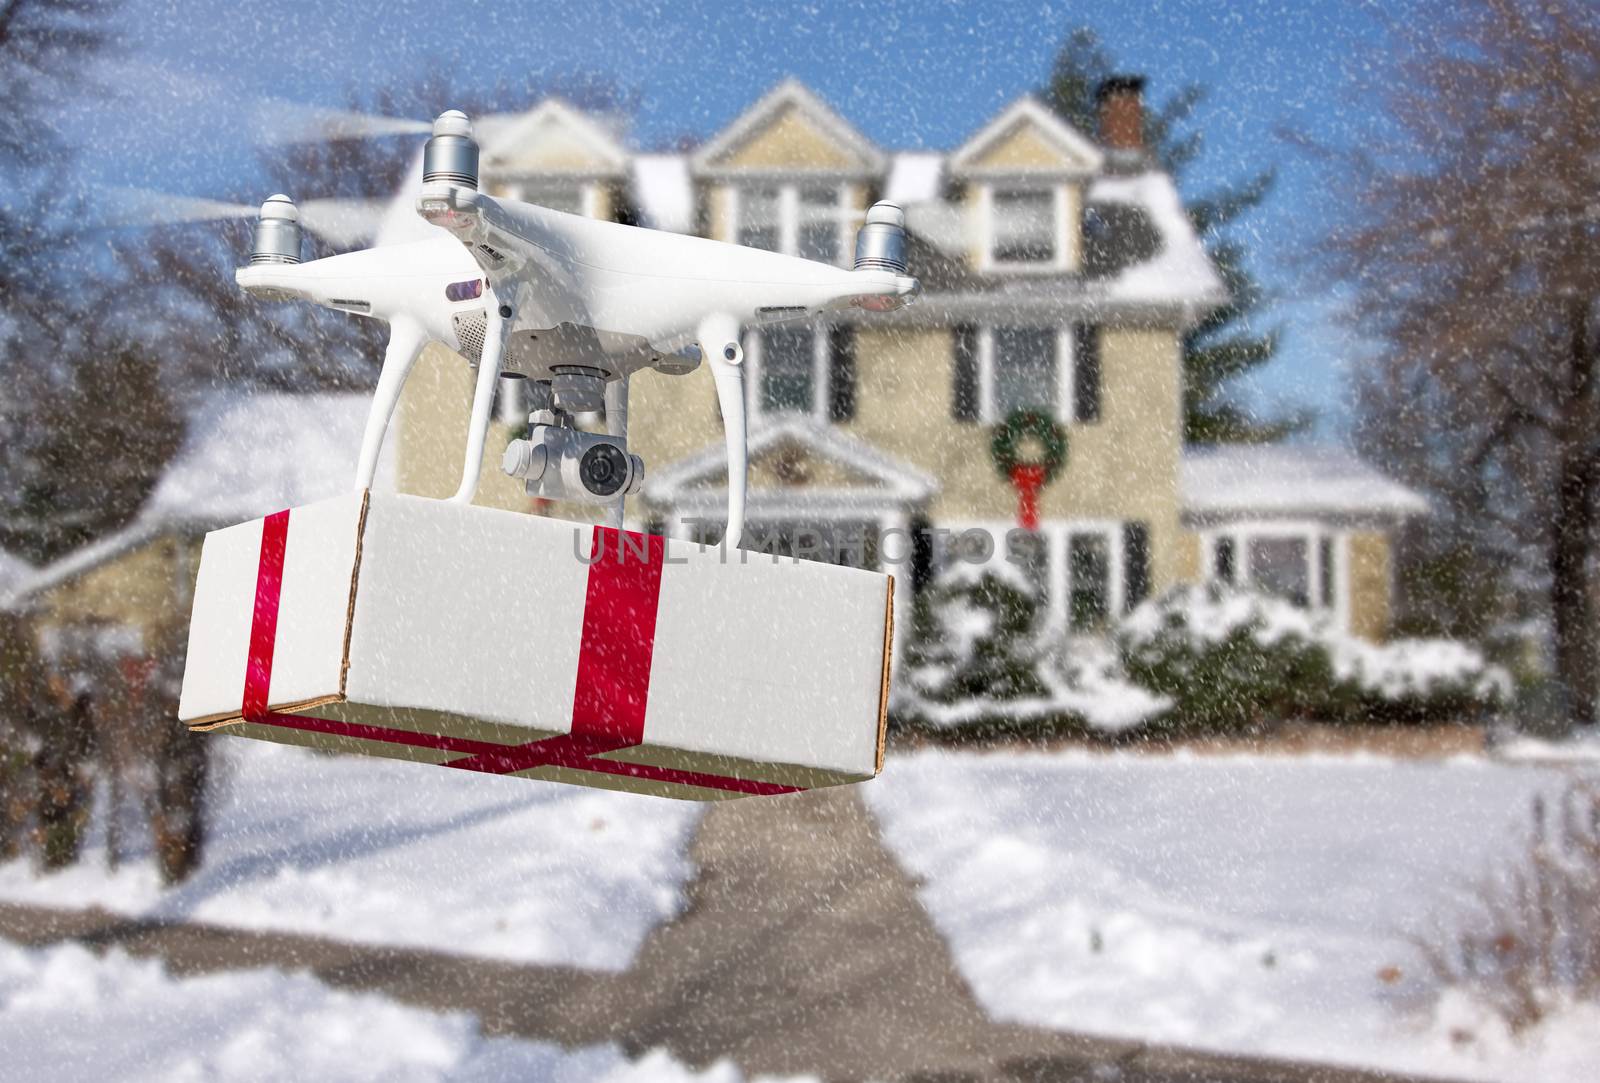 Unmanned Aircraft System (UAV) Quadcopter Drone Delivering Box With Red Ribbon To Home